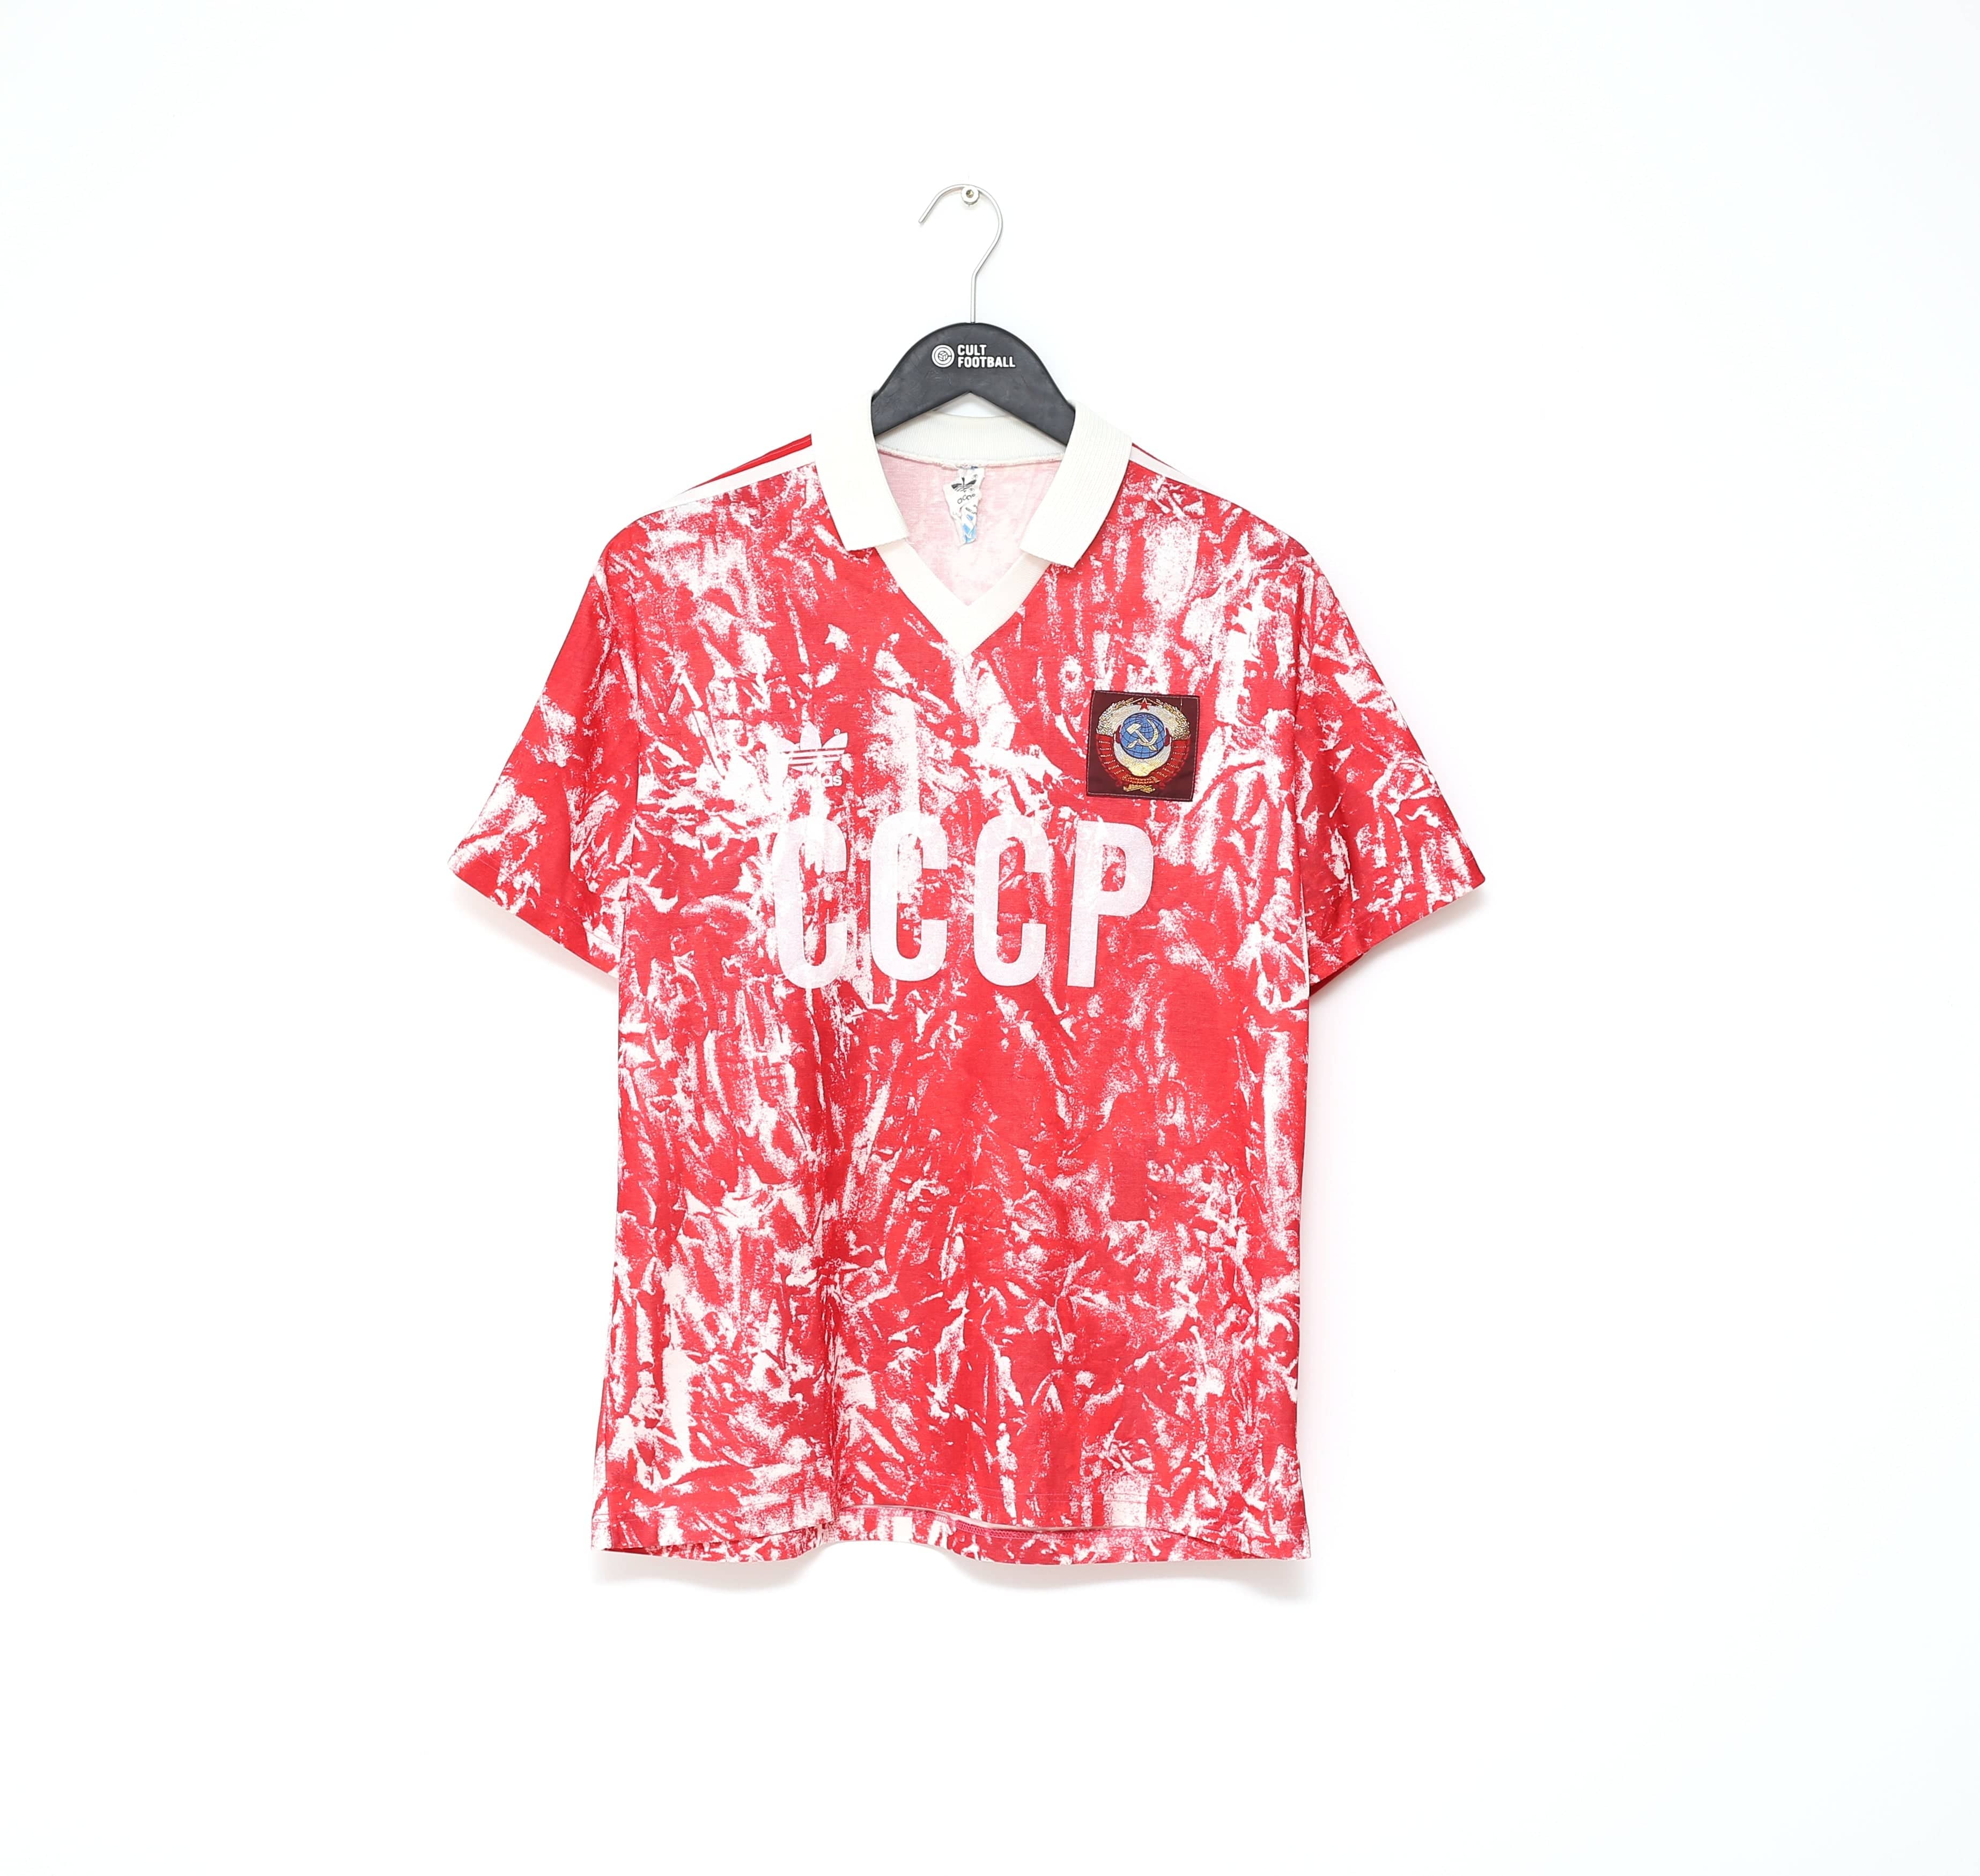 Soviet Union 1989-91 home by - Classic Football Shirts